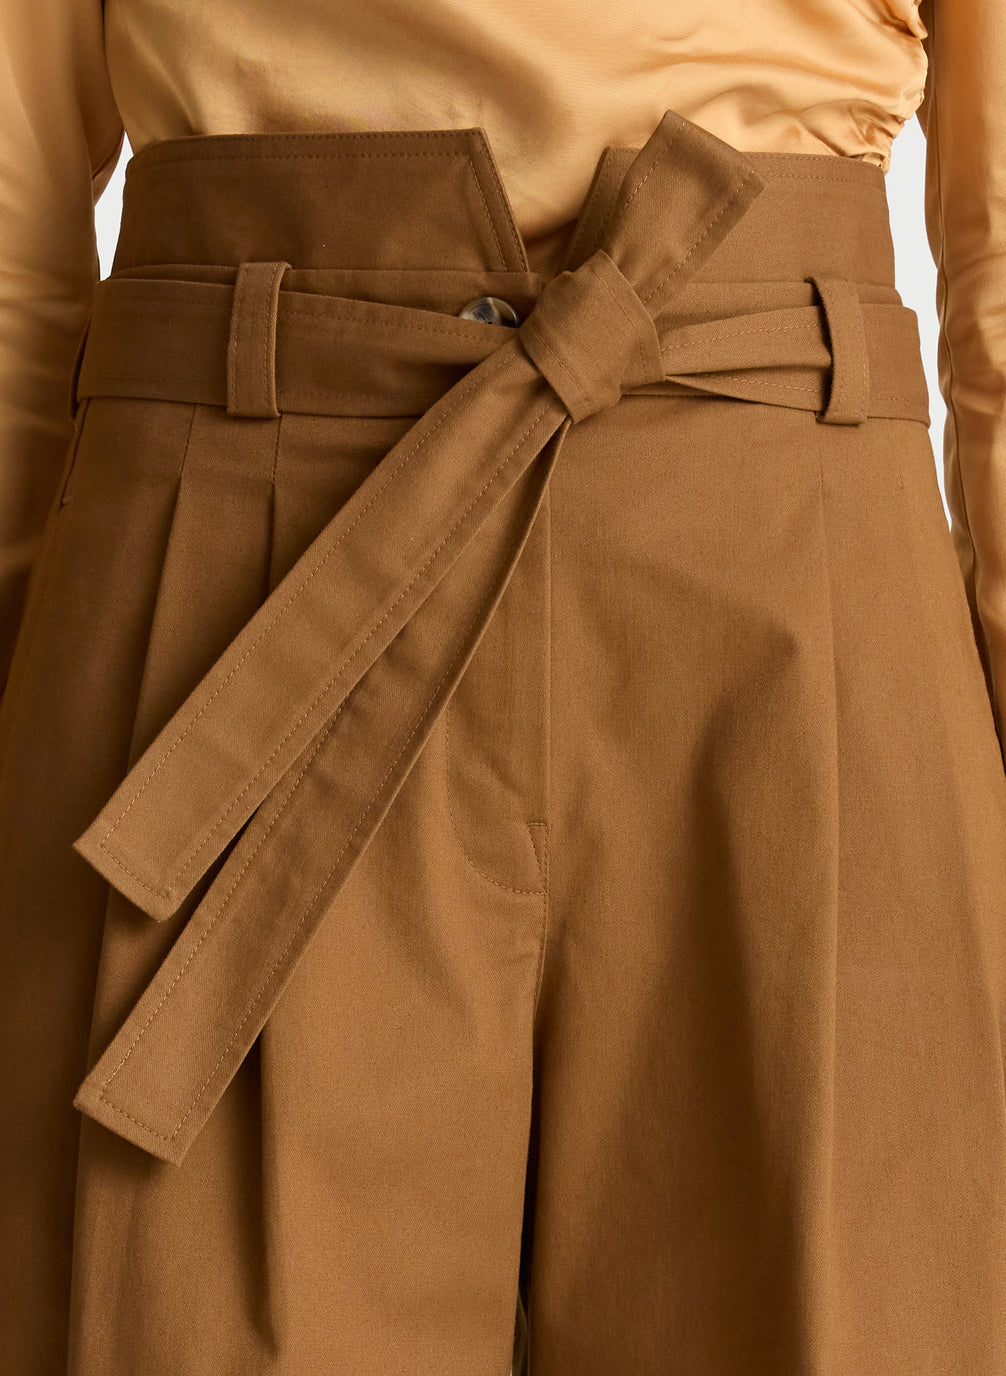 detail view of woman wearing tan one shoulder long sleeve top and brown wide leg pants